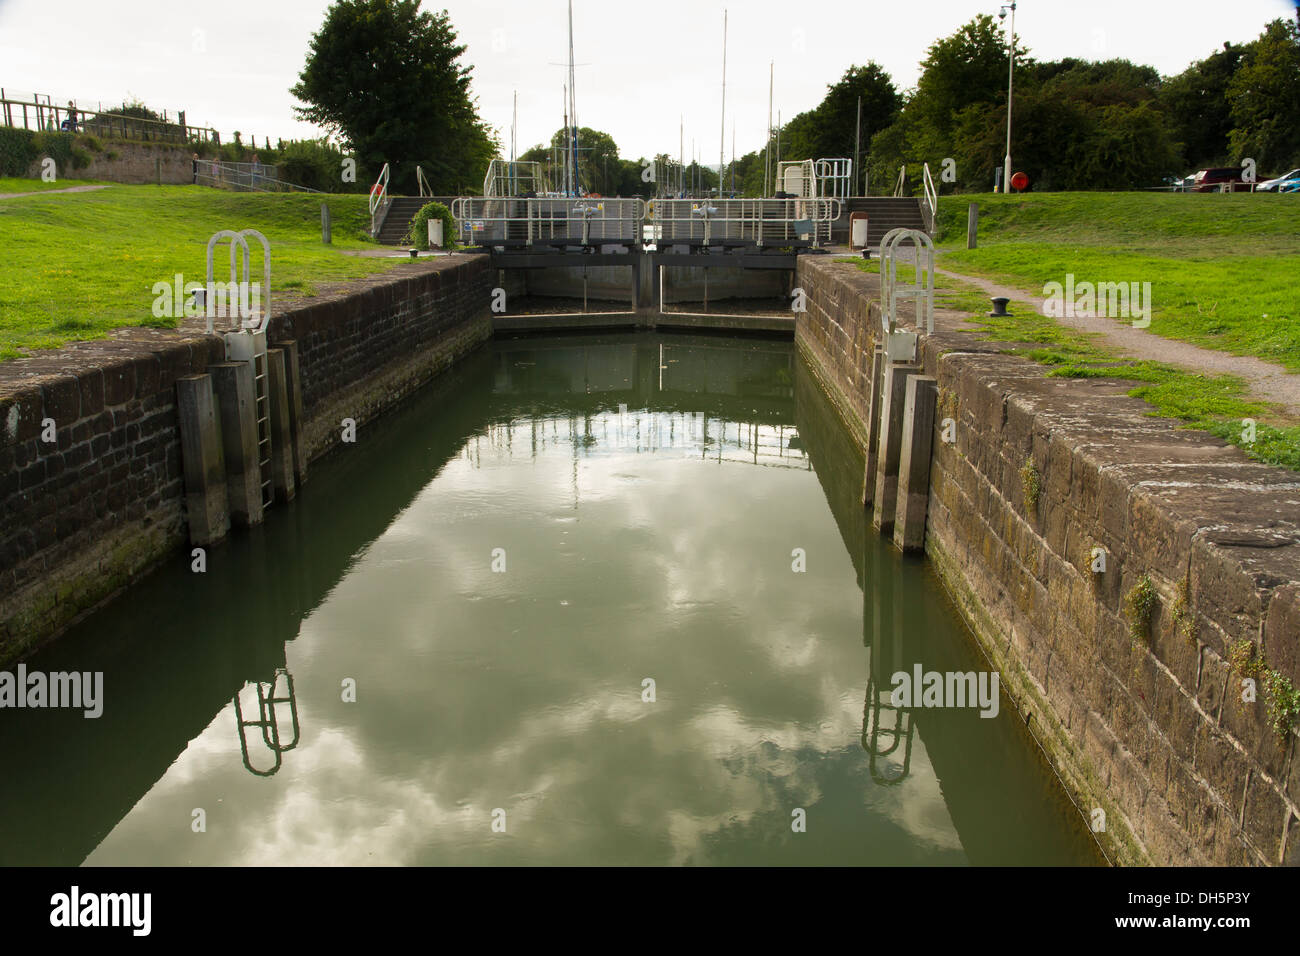 One of two sets of locks that allow access by boat to the River Severn, this is above the semi -tidal basin. Stock Photo